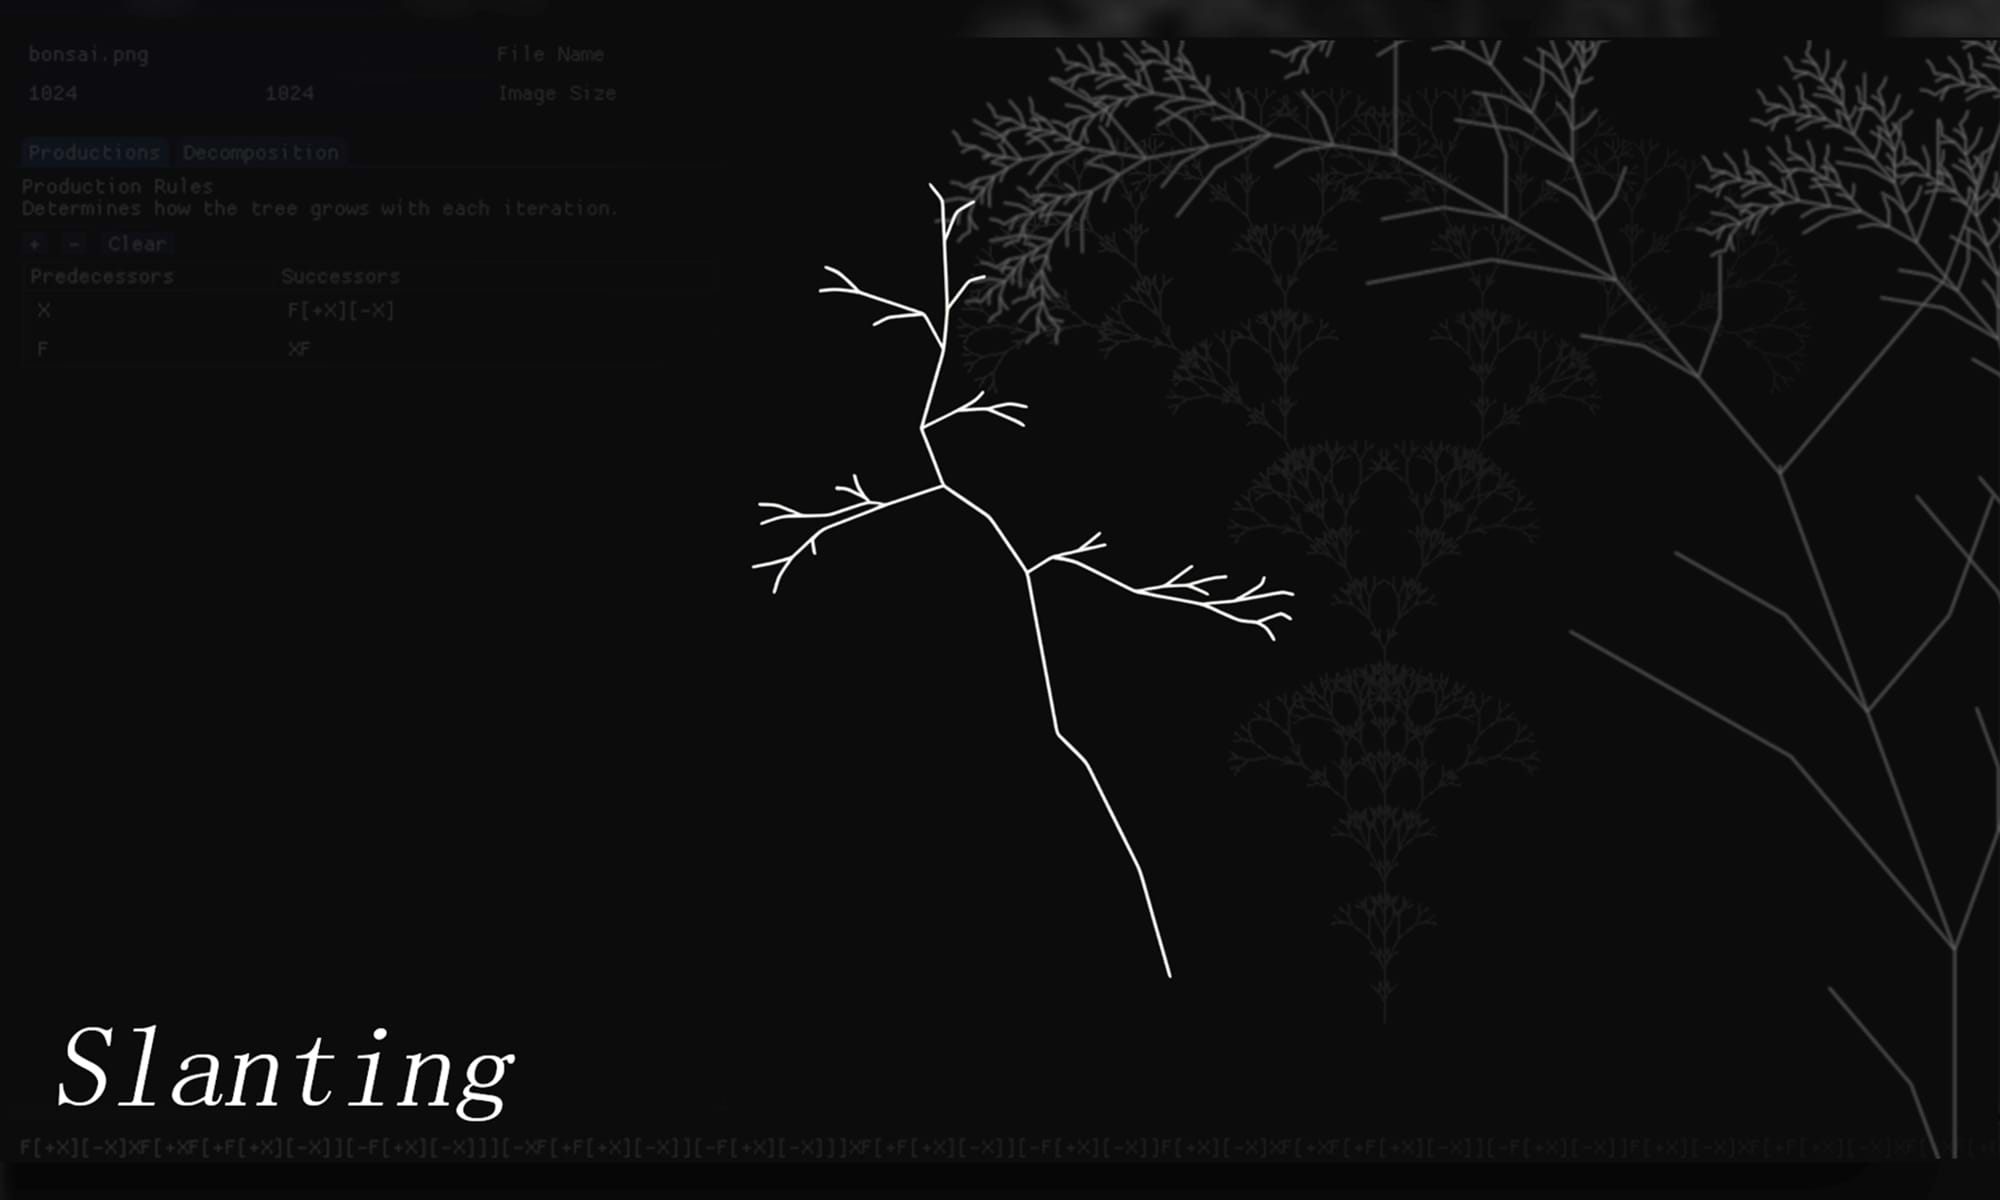 "Bonsai Trees for Computer Games" is a 2022 Digital Graduate Show project by Jordan Glendinning, a Computer Game Applications Development student at Abertay University. 